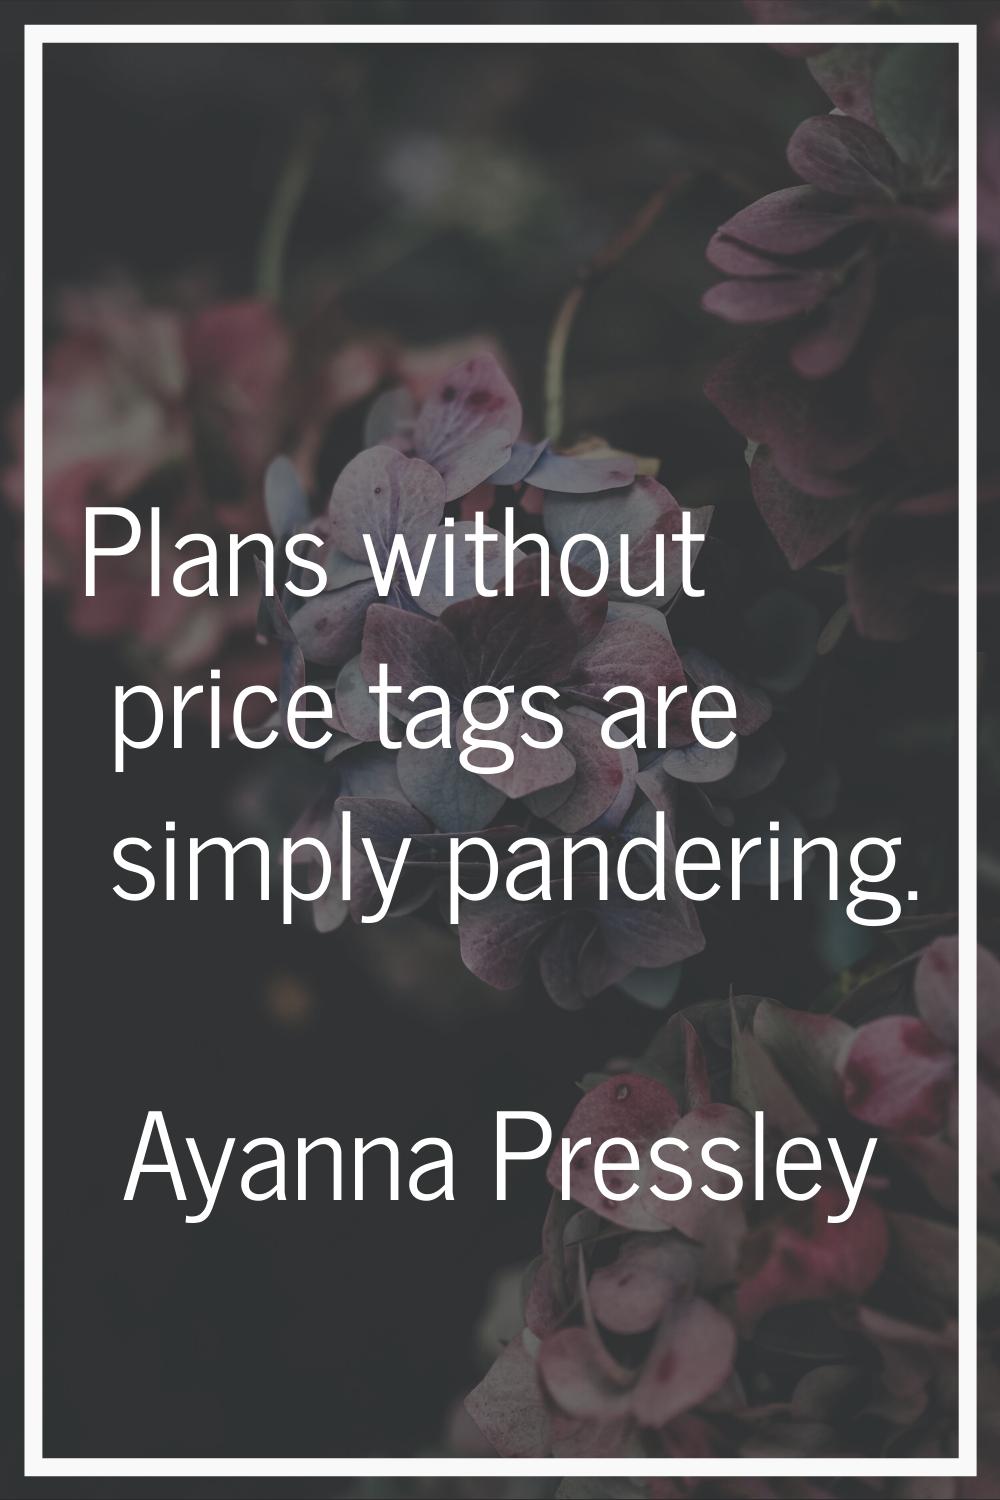 Plans without price tags are simply pandering.